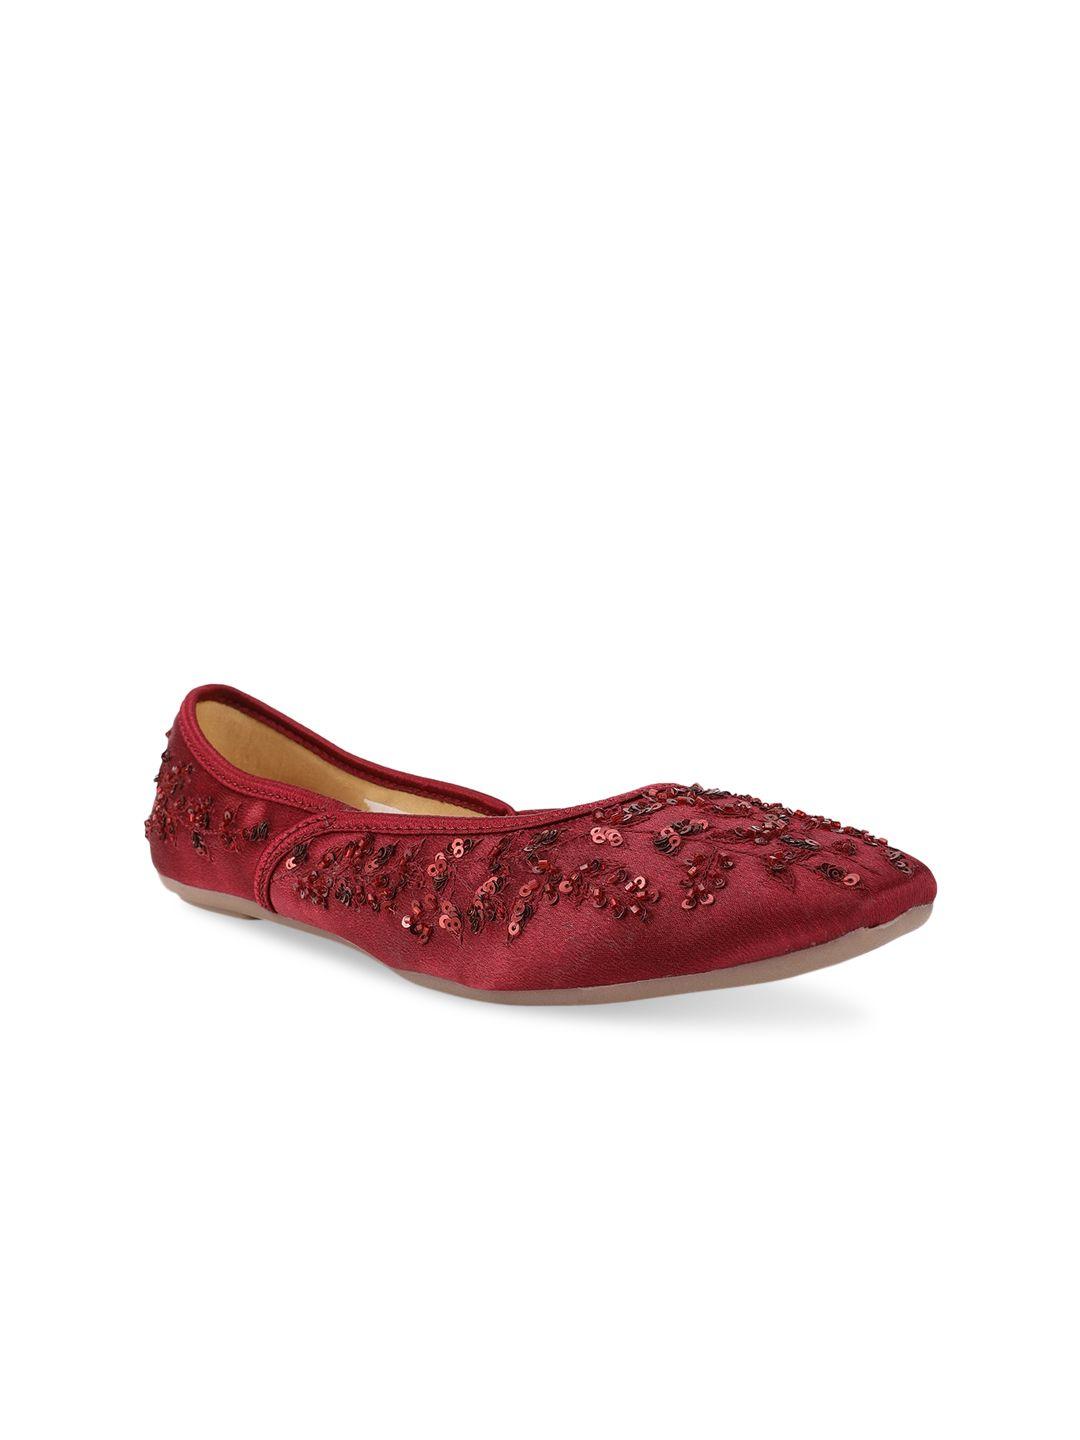 marie claire women maroon embellished ballerinas flats